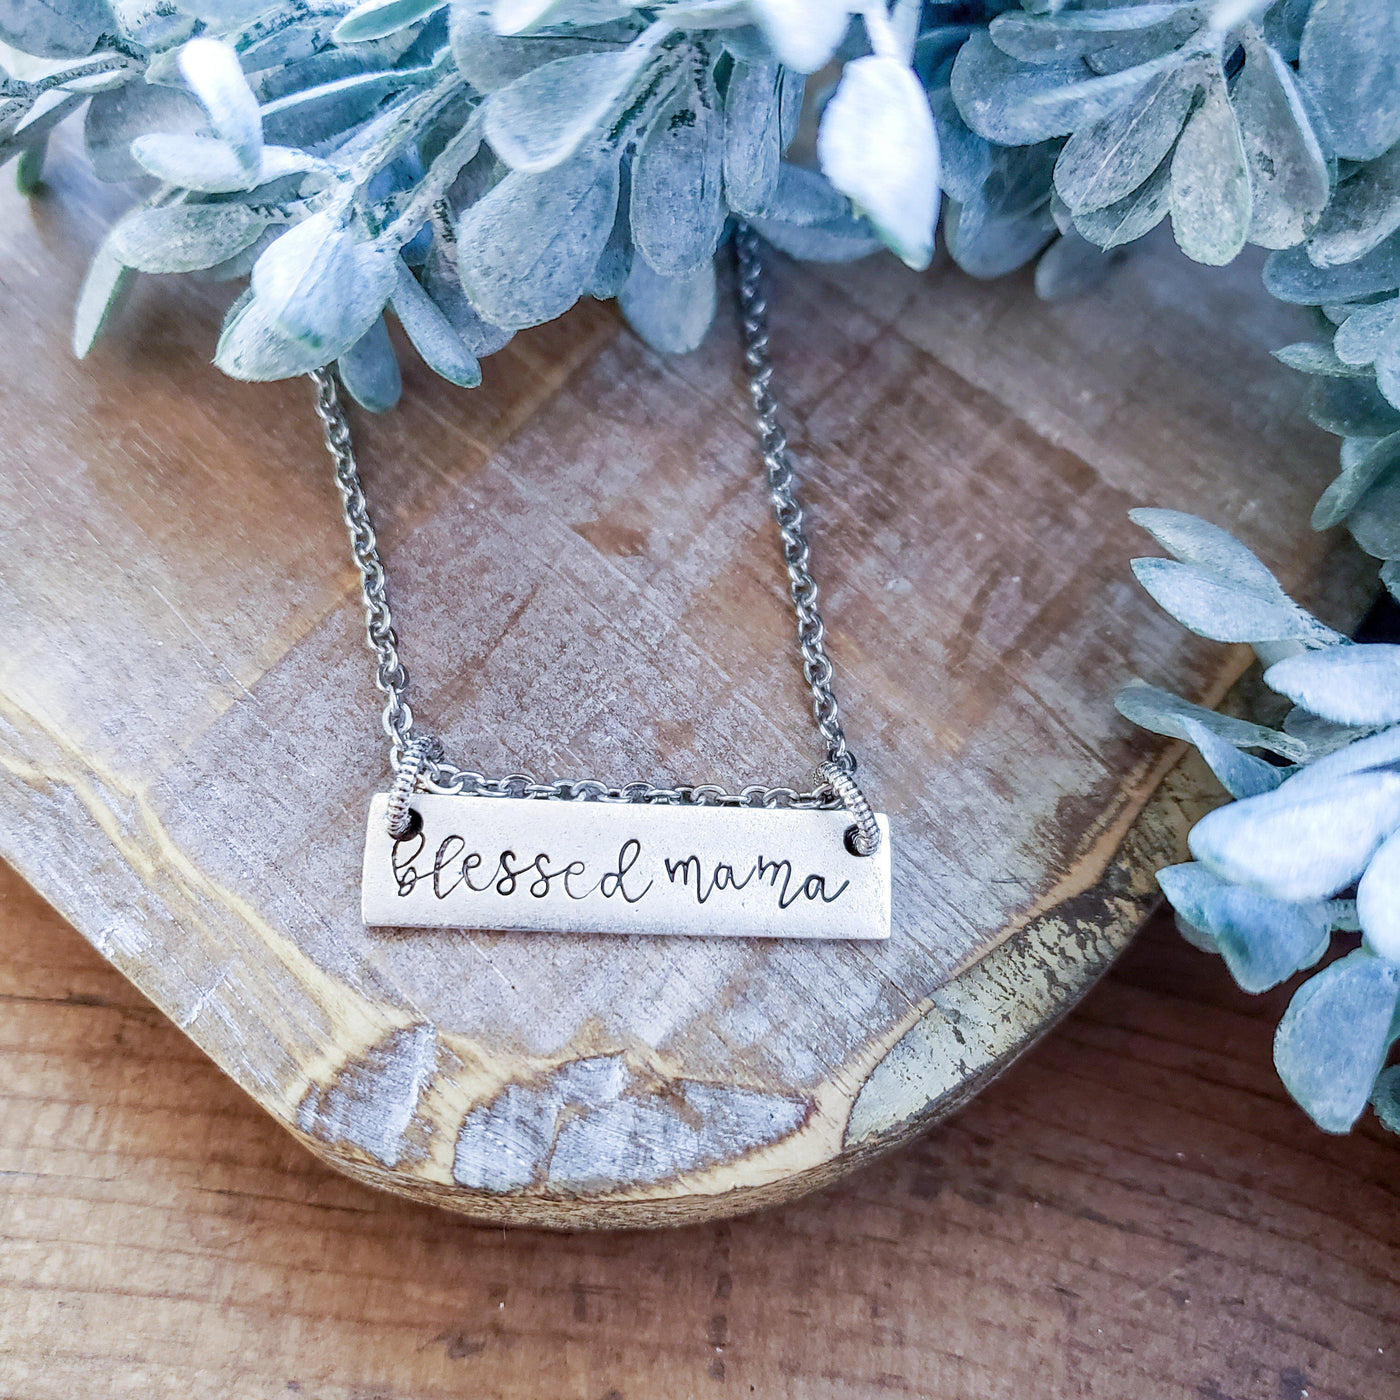 Blessed Mama - Little Blue Bus Jewelry